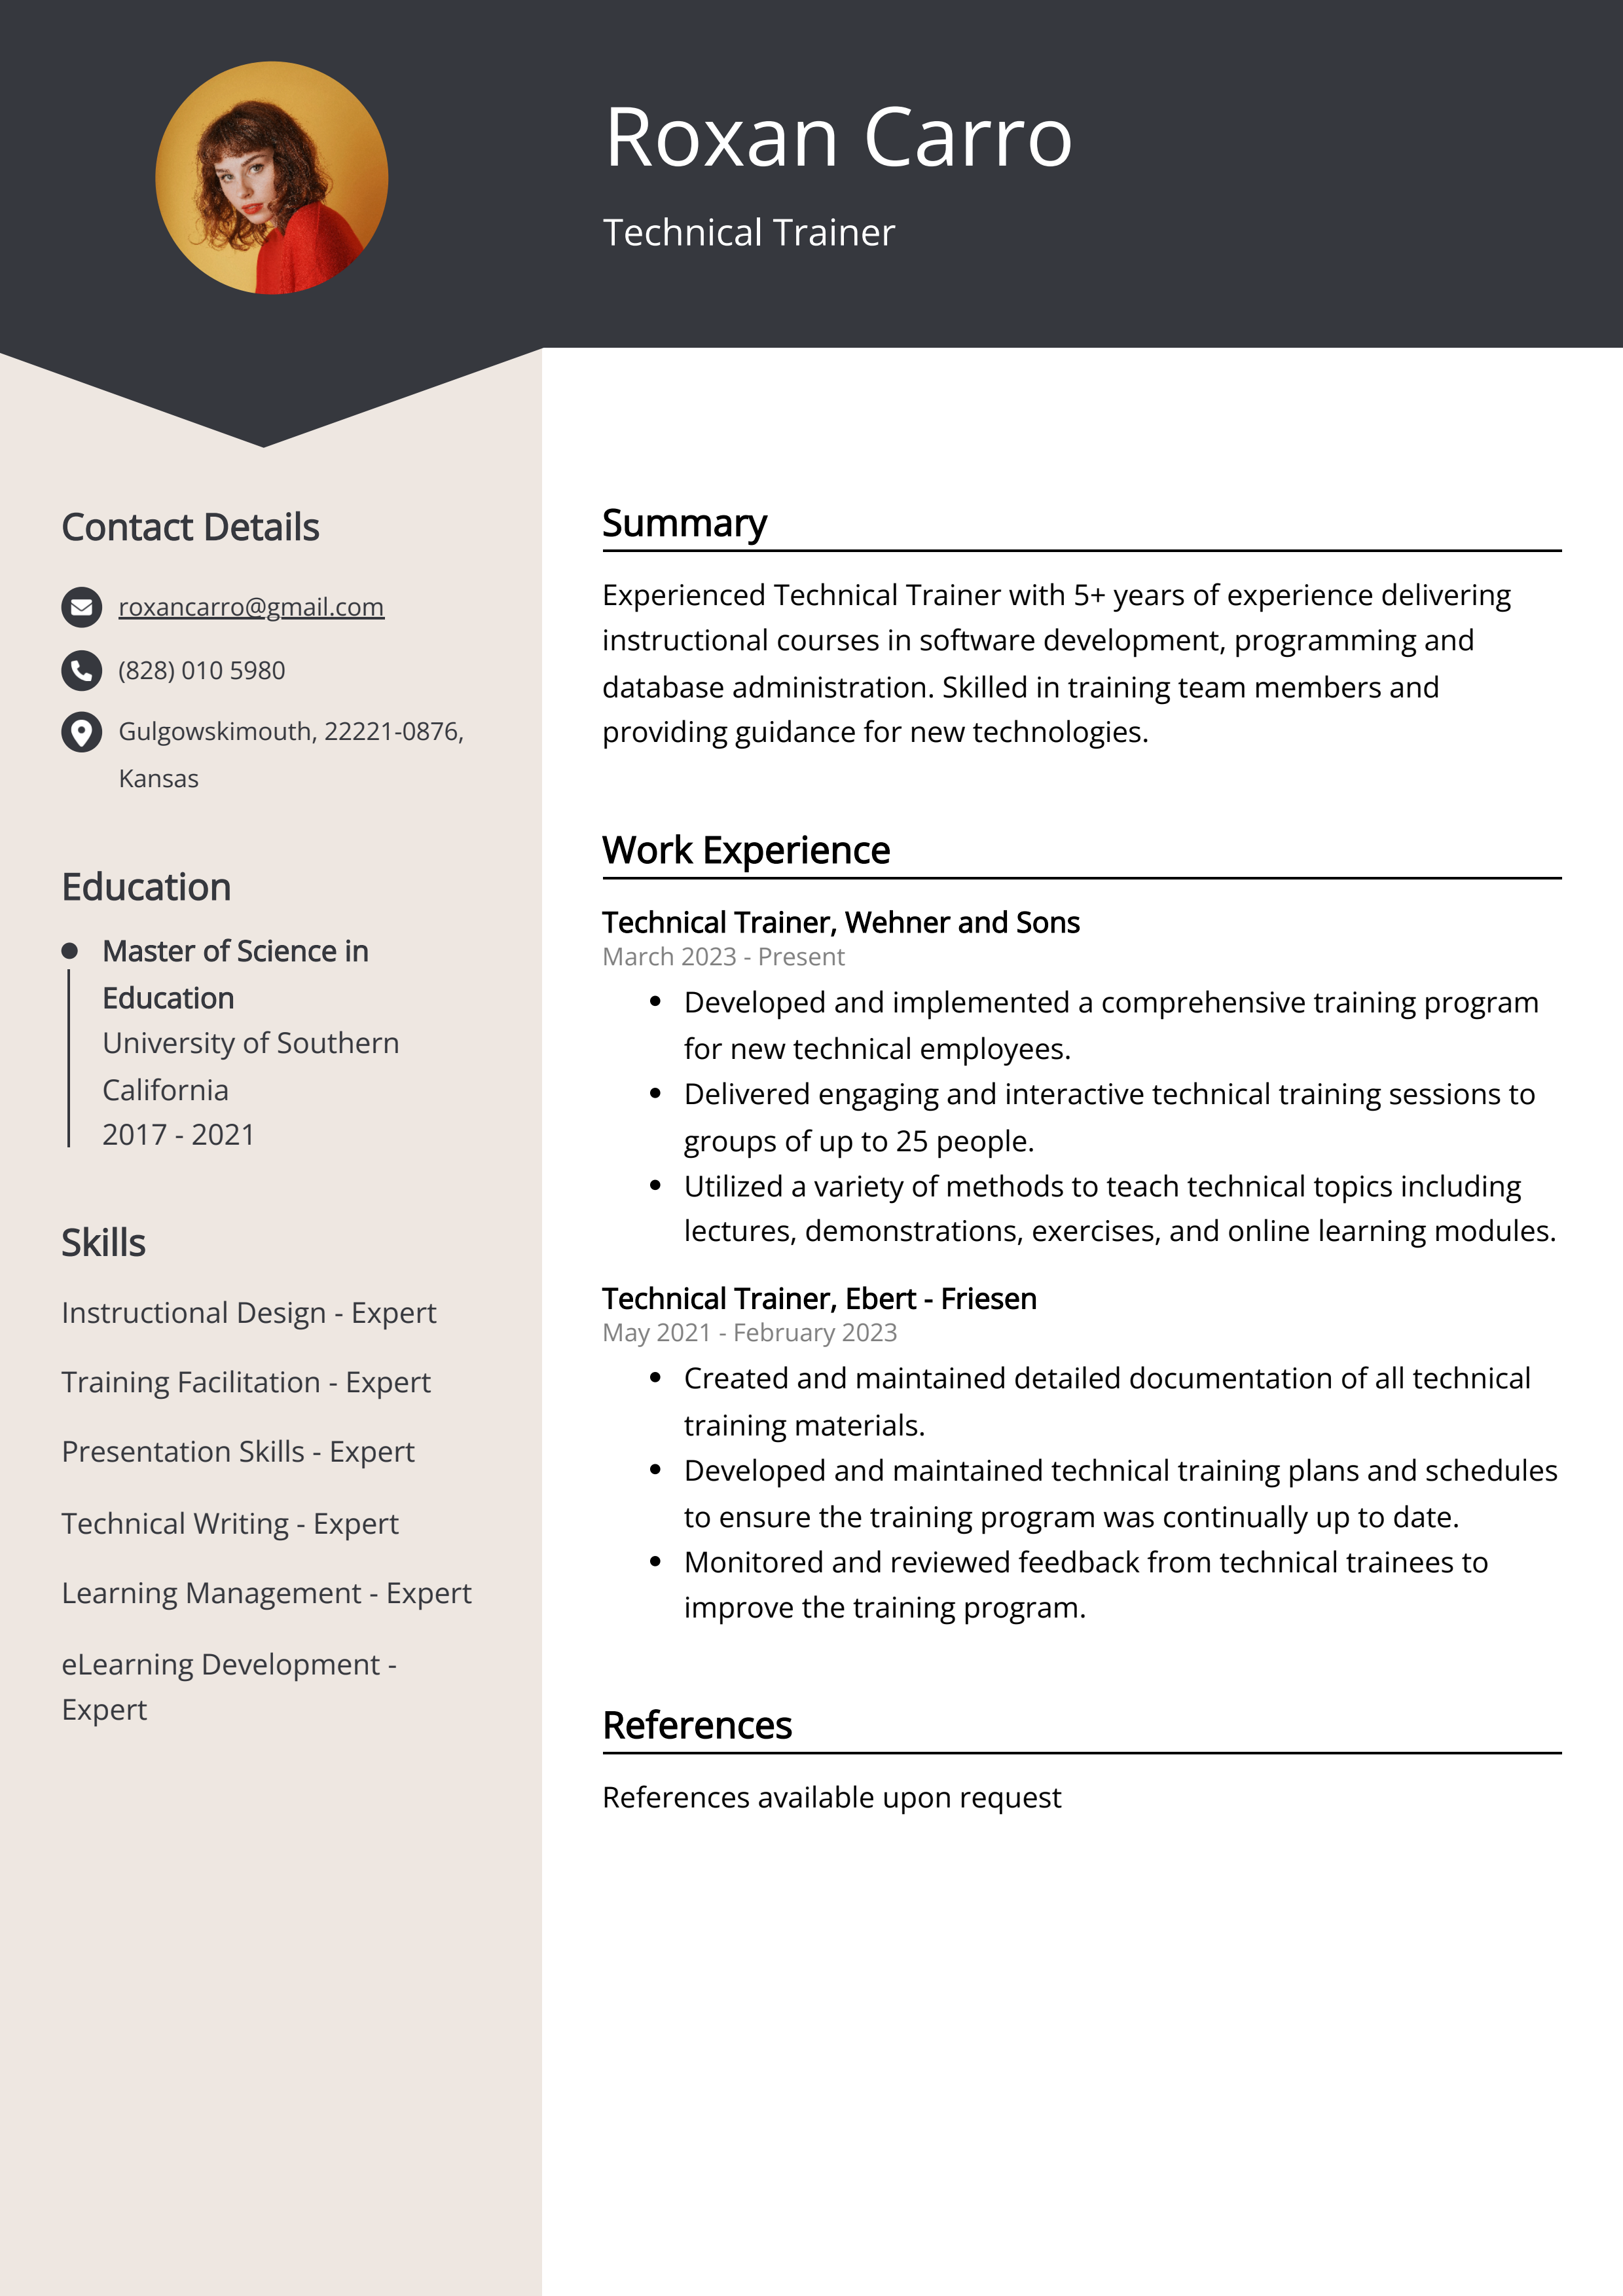 Technical Trainer CV Example